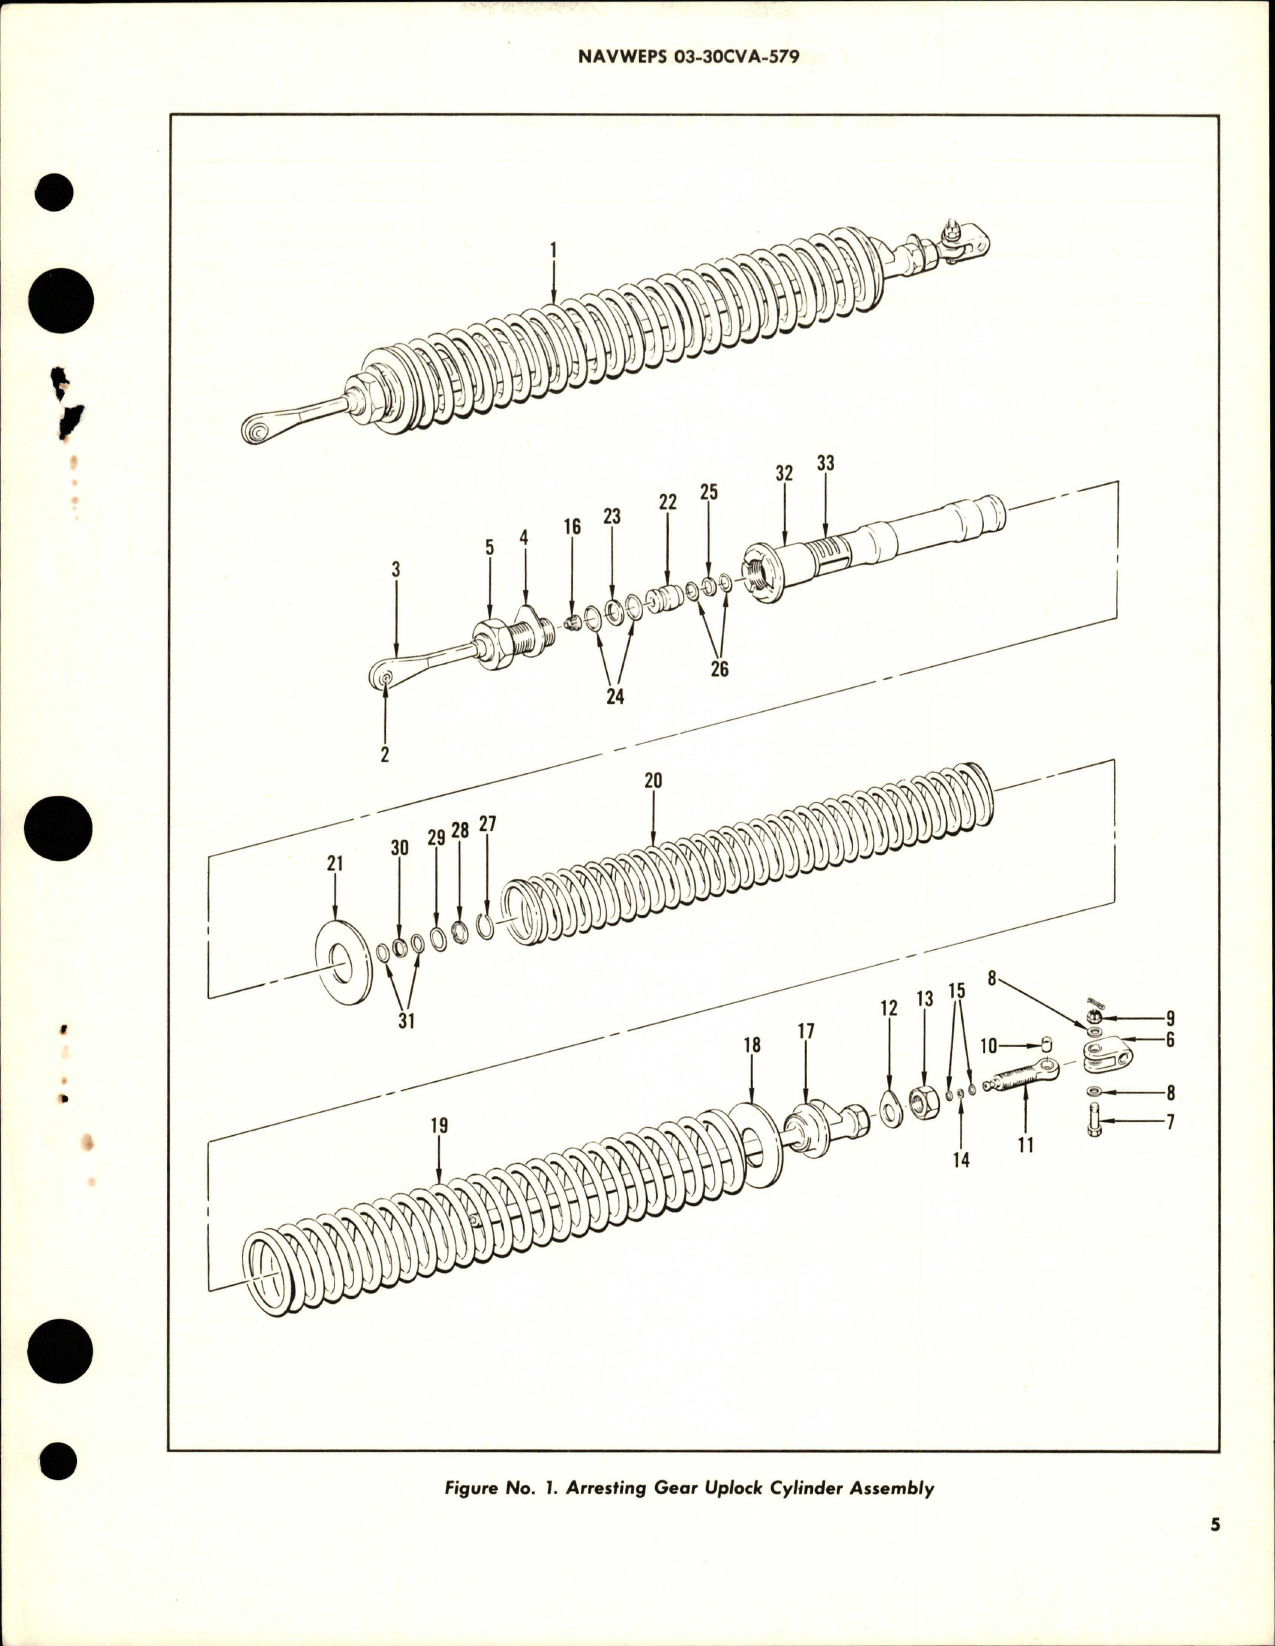 Sample page 5 from AirCorps Library document: Overhaul Instructions with Parts for Arresting Gear Uplock Cylinder Assembly 0 CV15-601057-2, CV15-601057-3, and CV15-601057-4